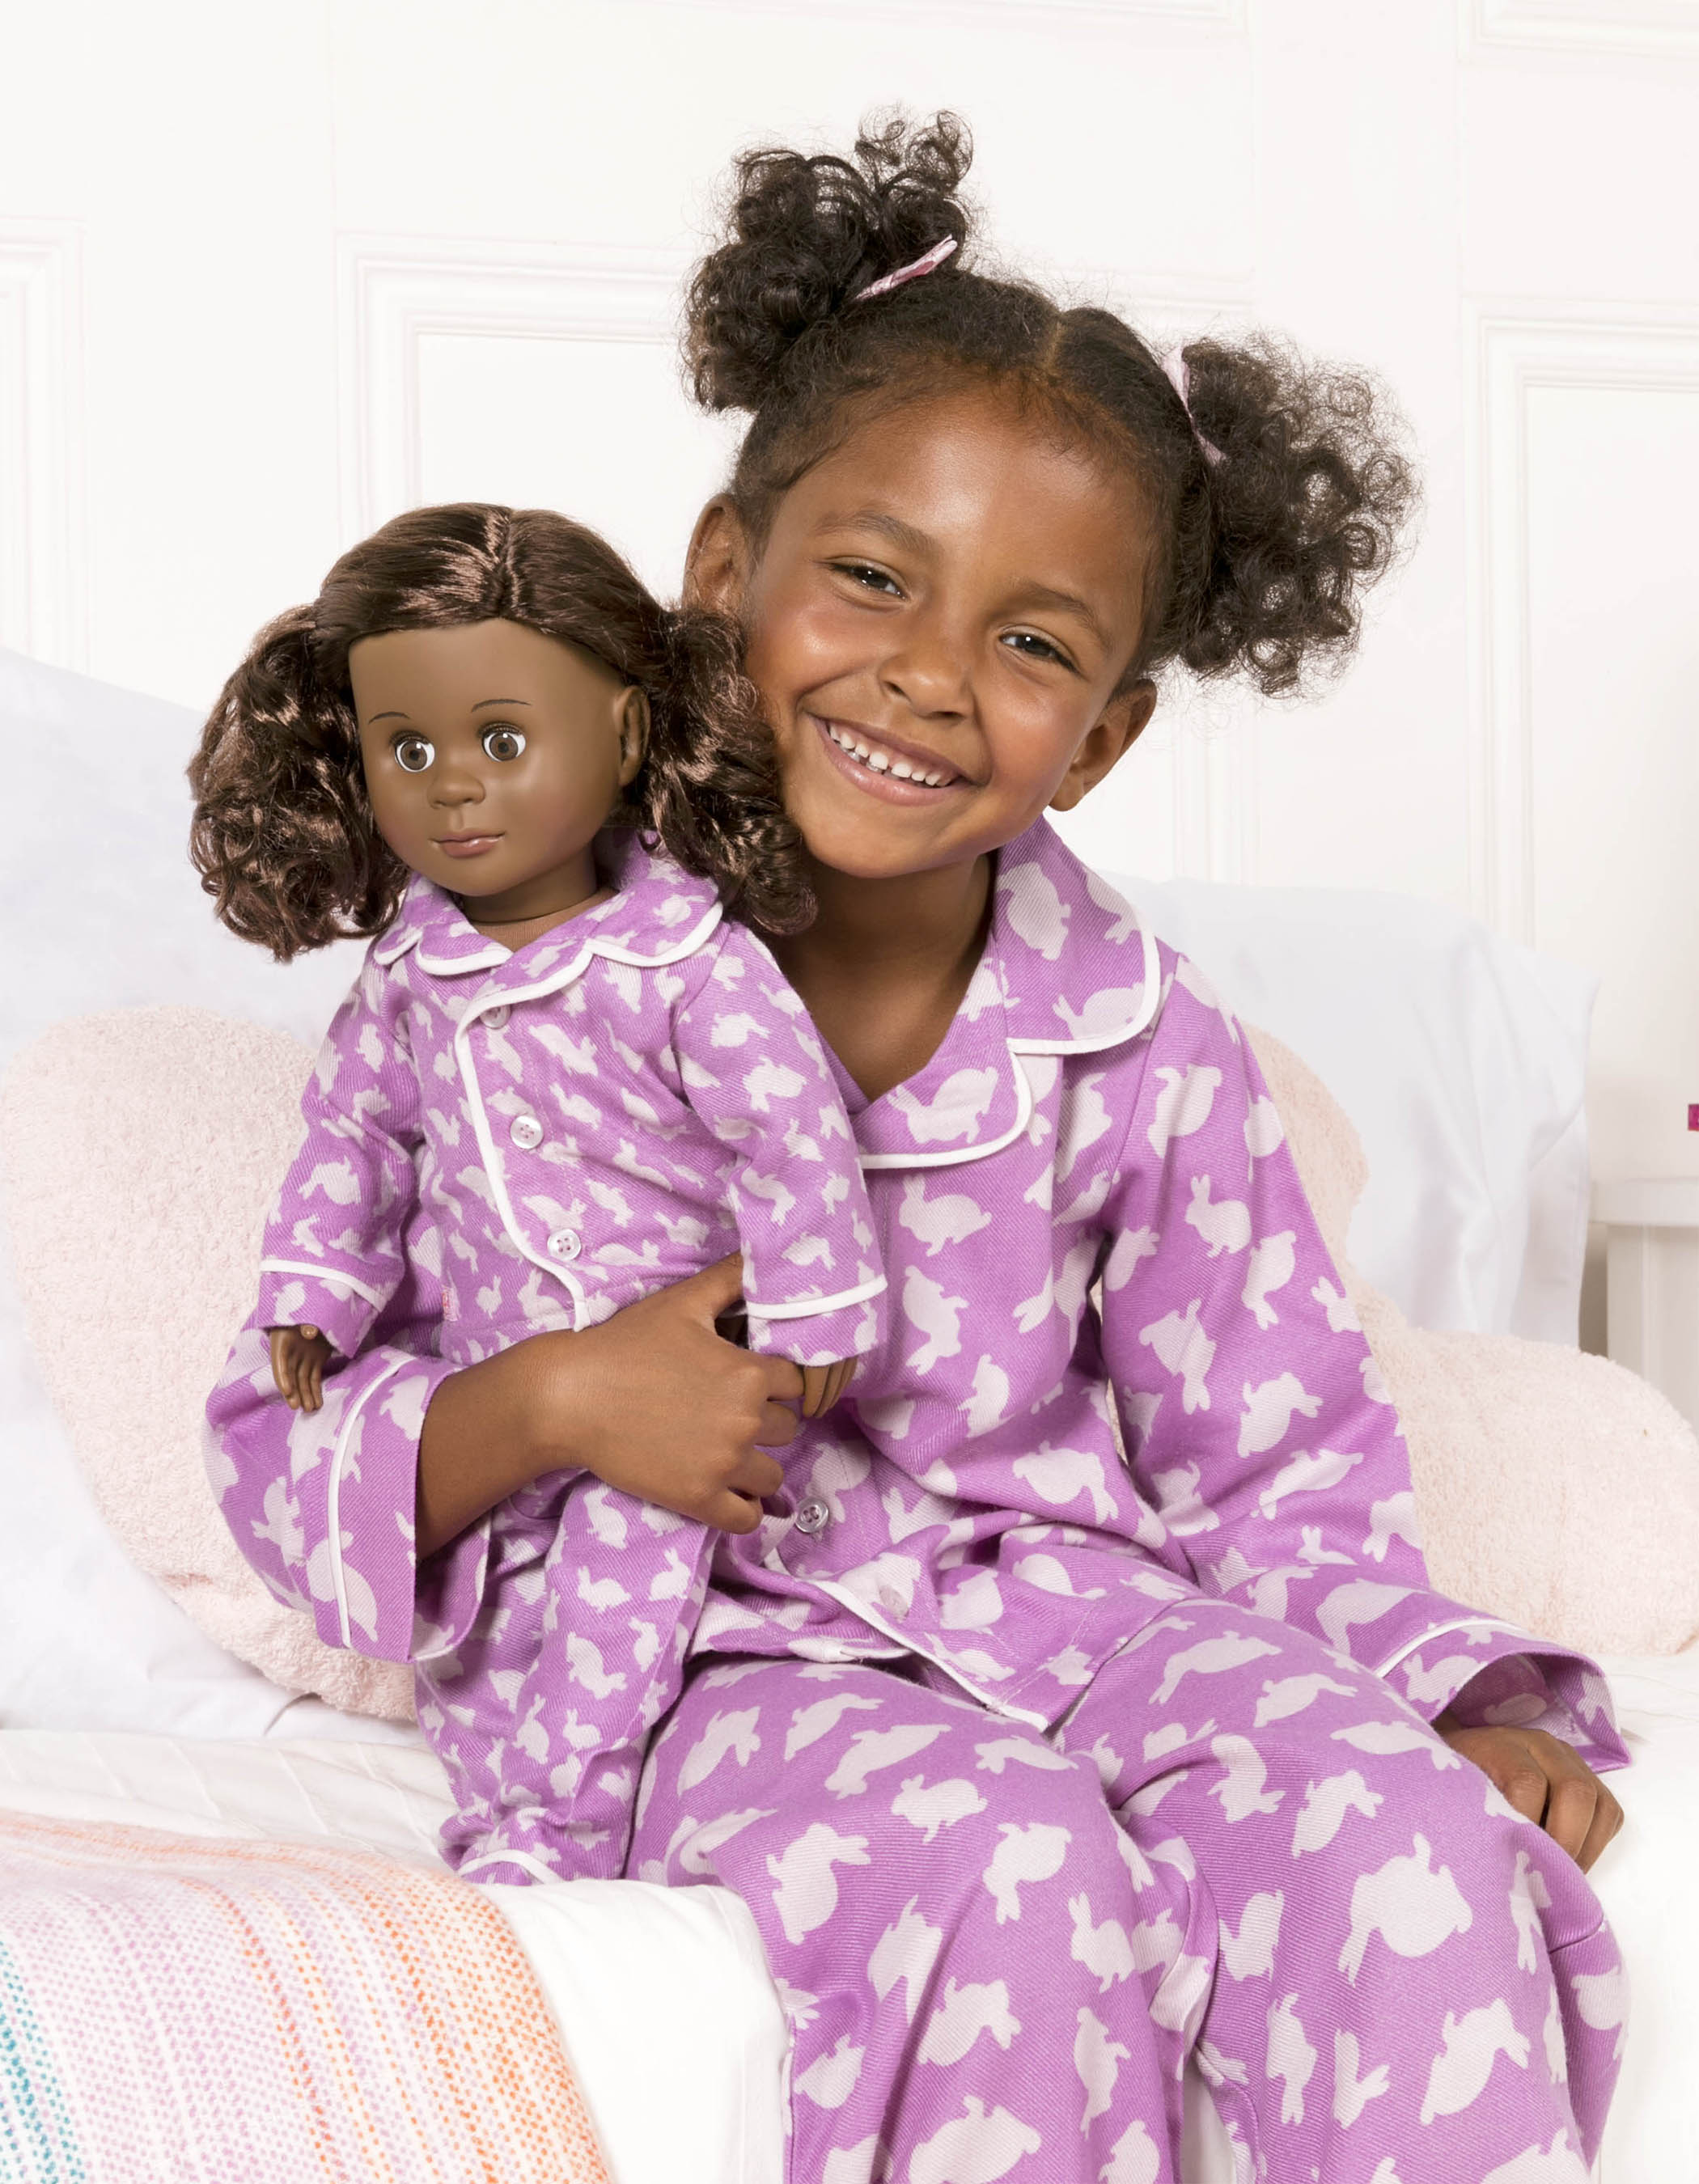 Me and You Bunny pajamas in macthing sizes for kids and dolls!